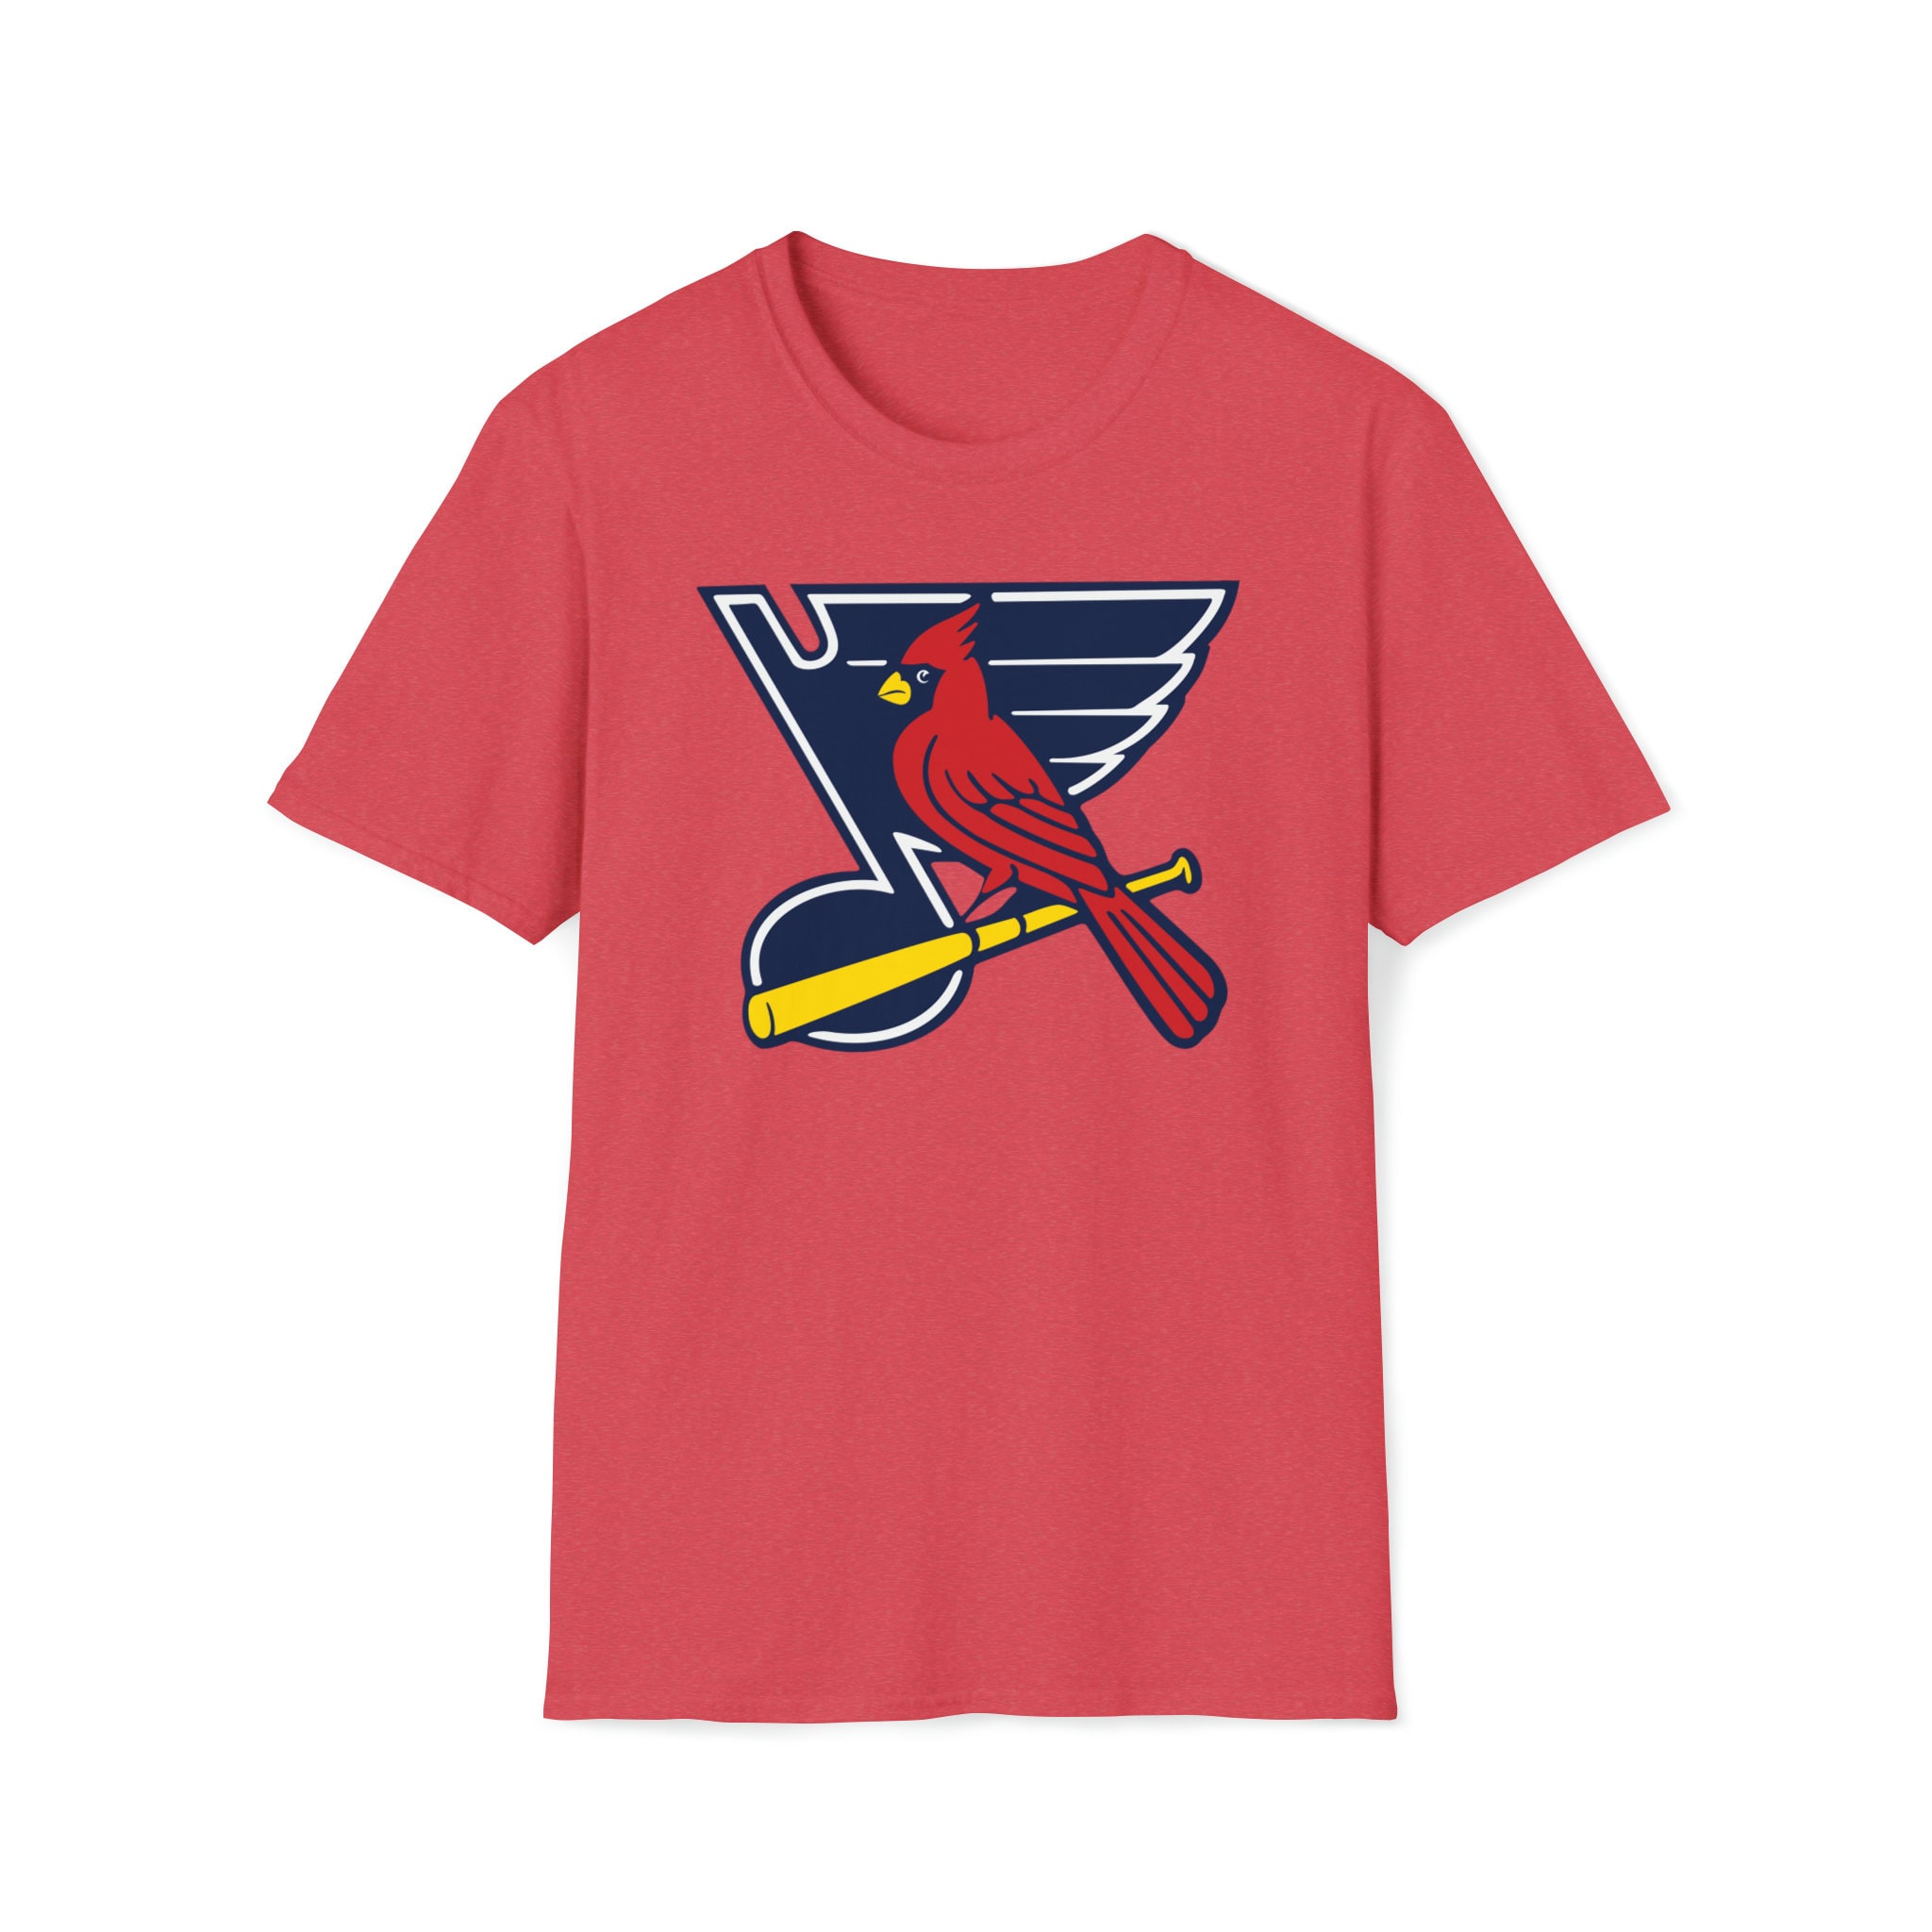 5 pujols st louis cardinals and 90 o'reilly st louis blues of st louis  sports shirt, hoodie, sweater, long sleeve and tank top